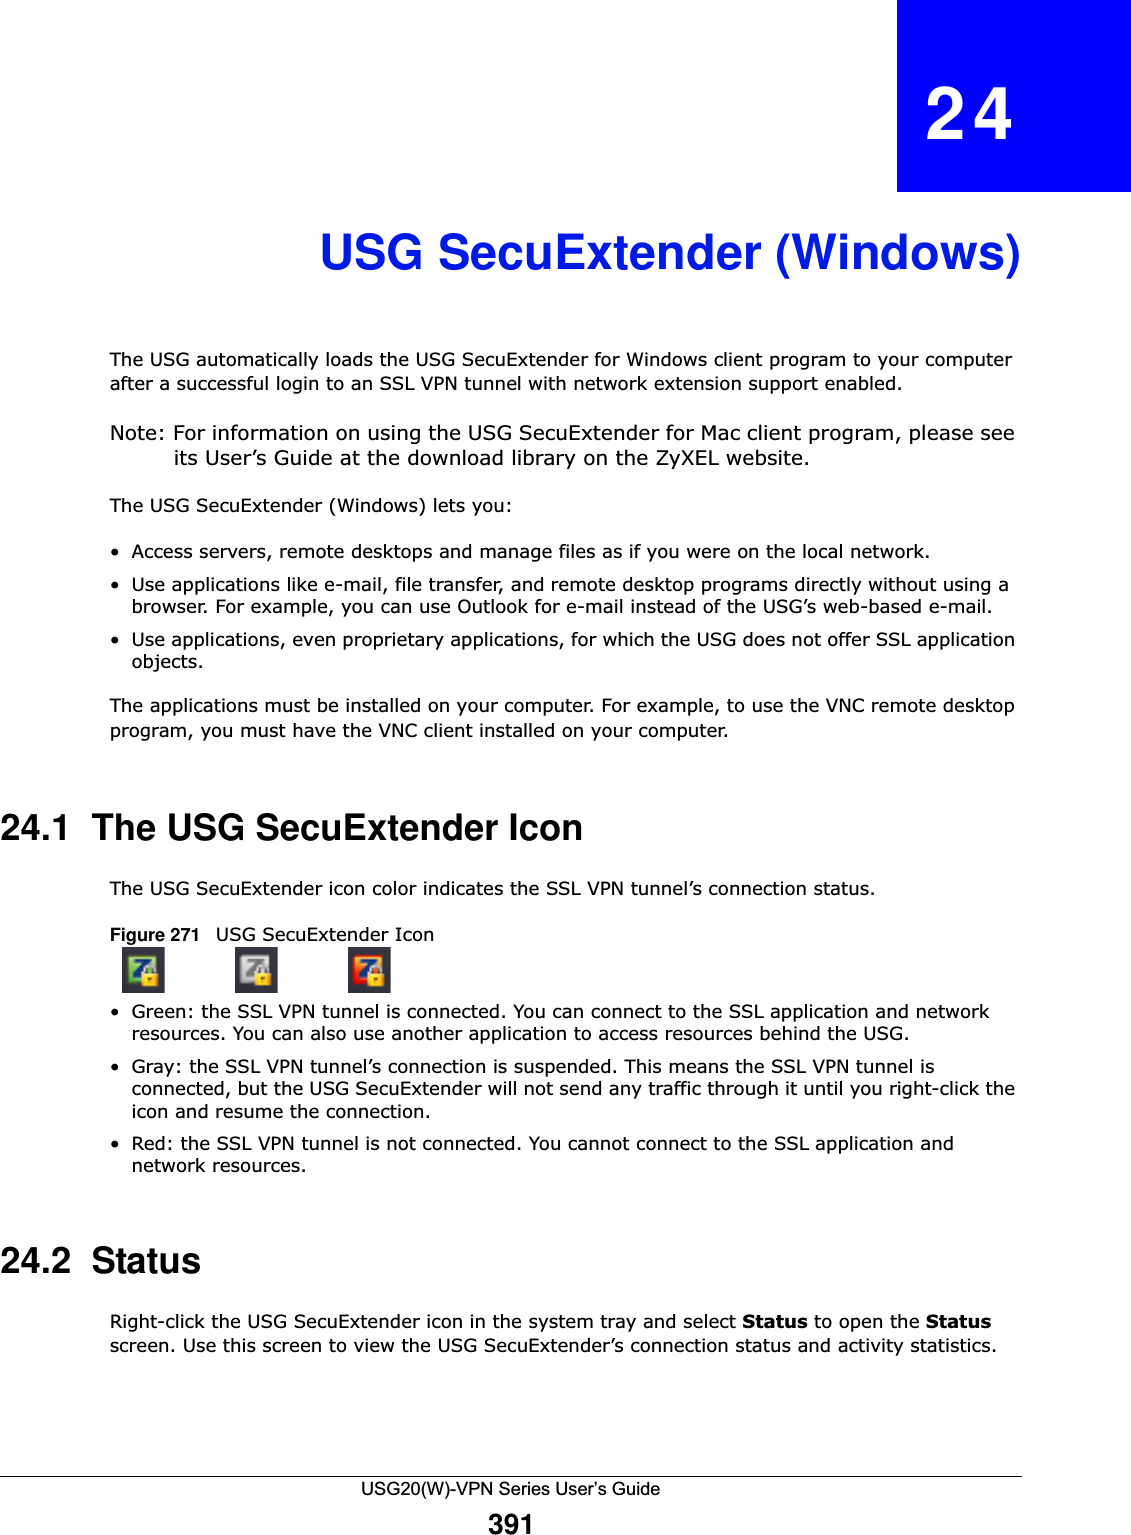 USG20(W)-VPN Series User’s Guide391CHAPTER   24USG SecuExtender (Windows)The USG automatically loads the USG SecuExtender for Windows client program to your computer after a successful login to an SSL VPN tunnel with network extension support enabled. Note: For information on using the USG SecuExtender for Mac client program, please see its User’s Guide at the download library on the ZyXEL website.The USG SecuExtender (Windows) lets you:• Access servers, remote desktops and manage files as if you were on the local network. • Use applications like e-mail, file transfer, and remote desktop programs directly without using a browser. For example, you can use Outlook for e-mail instead of the USG’s web-based e-mail. • Use applications, even proprietary applications, for which the USG does not offer SSL application objects. The applications must be installed on your computer. For example, to use the VNC remote desktop program, you must have the VNC client installed on your computer.24.1  The USG SecuExtender IconThe USG SecuExtender icon color indicates the SSL VPN tunnel’s connection status.Figure 271   USG SecuExtender Icon   • Green: the SSL VPN tunnel is connected. You can connect to the SSL application and network resources. You can also use another application to access resources behind the USG.• Gray: the SSL VPN tunnel’s connection is suspended. This means the SSL VPN tunnel is connected, but the USG SecuExtender will not send any traffic through it until you right-click the icon and resume the connection.• Red: the SSL VPN tunnel is not connected. You cannot connect to the SSL application and network resources.24.2  StatusRight-click the USG SecuExtender icon in the system tray and select Status to open the Status screen. Use this screen to view the USG SecuExtender’s connection status and activity statistics.